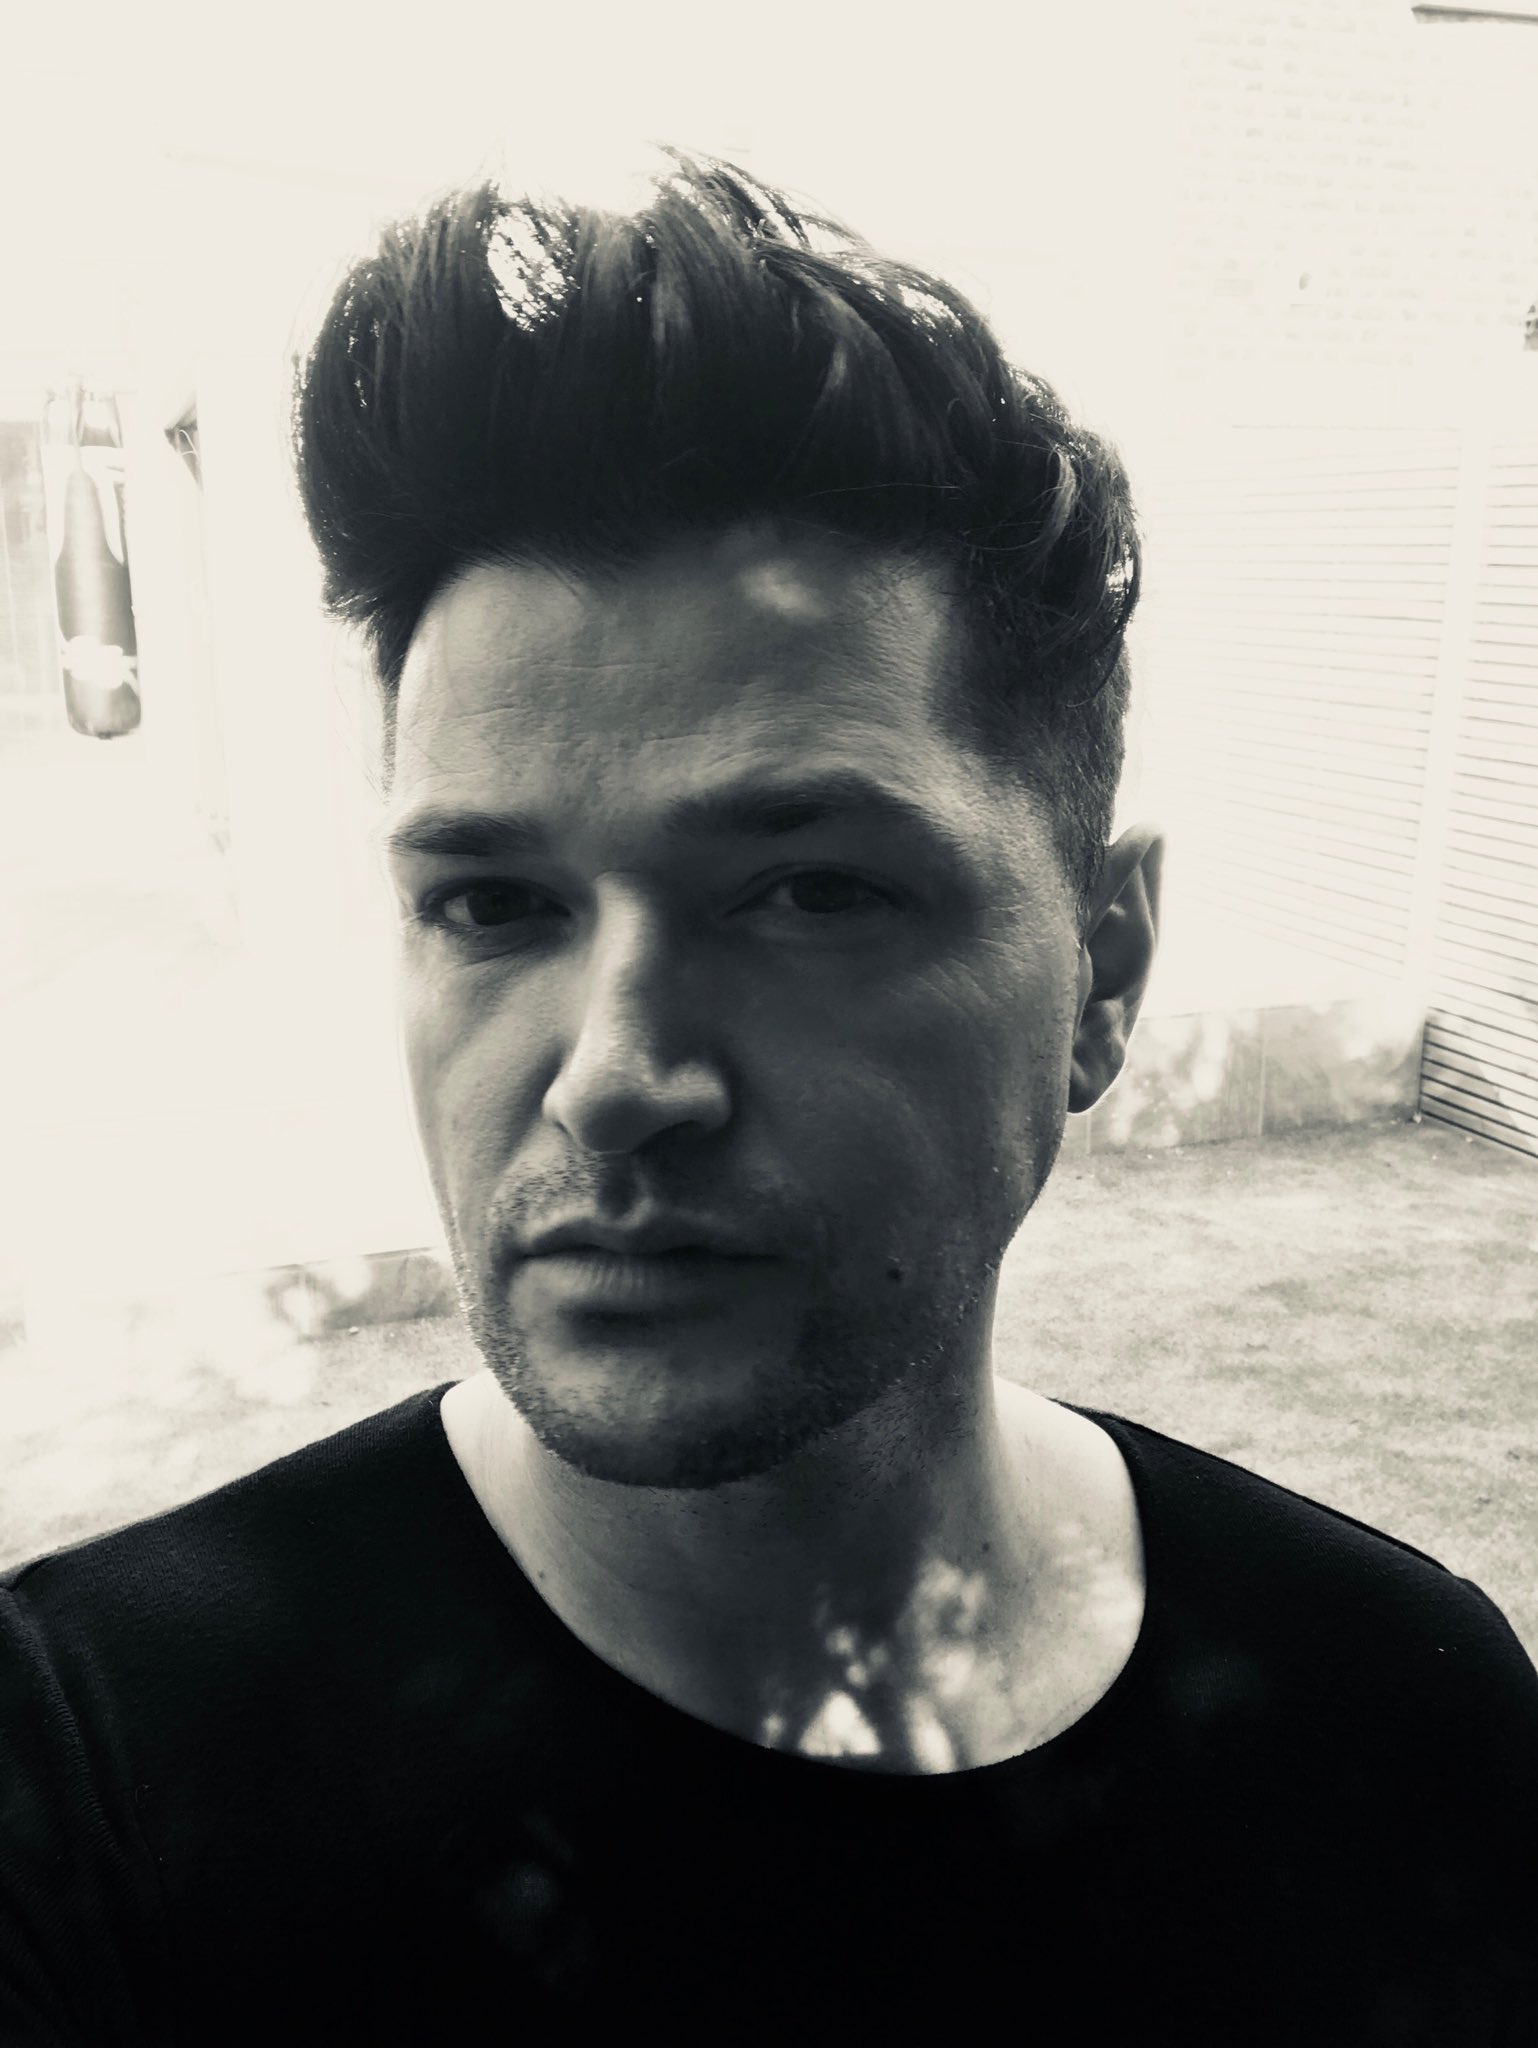 Danny Odonoghue On Twitter Thinking Of Bringing The Mullet Back Grown Out The Back Again